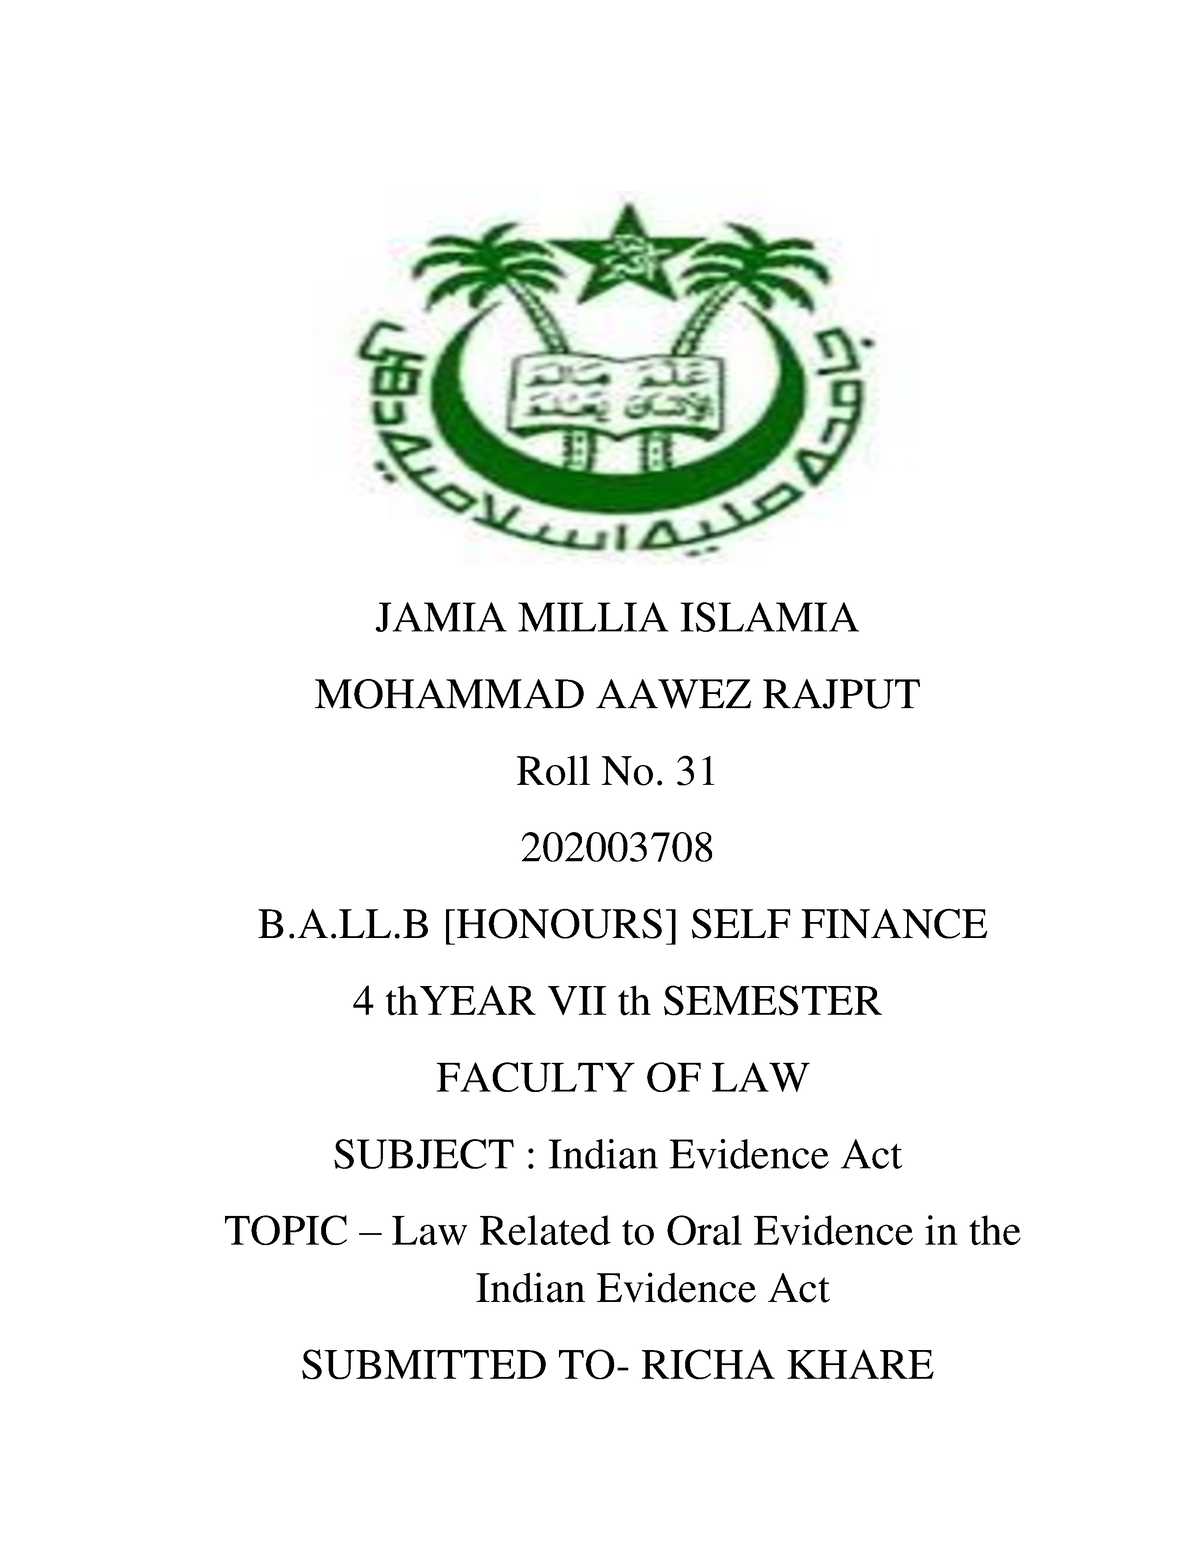 jamia assignment cover page